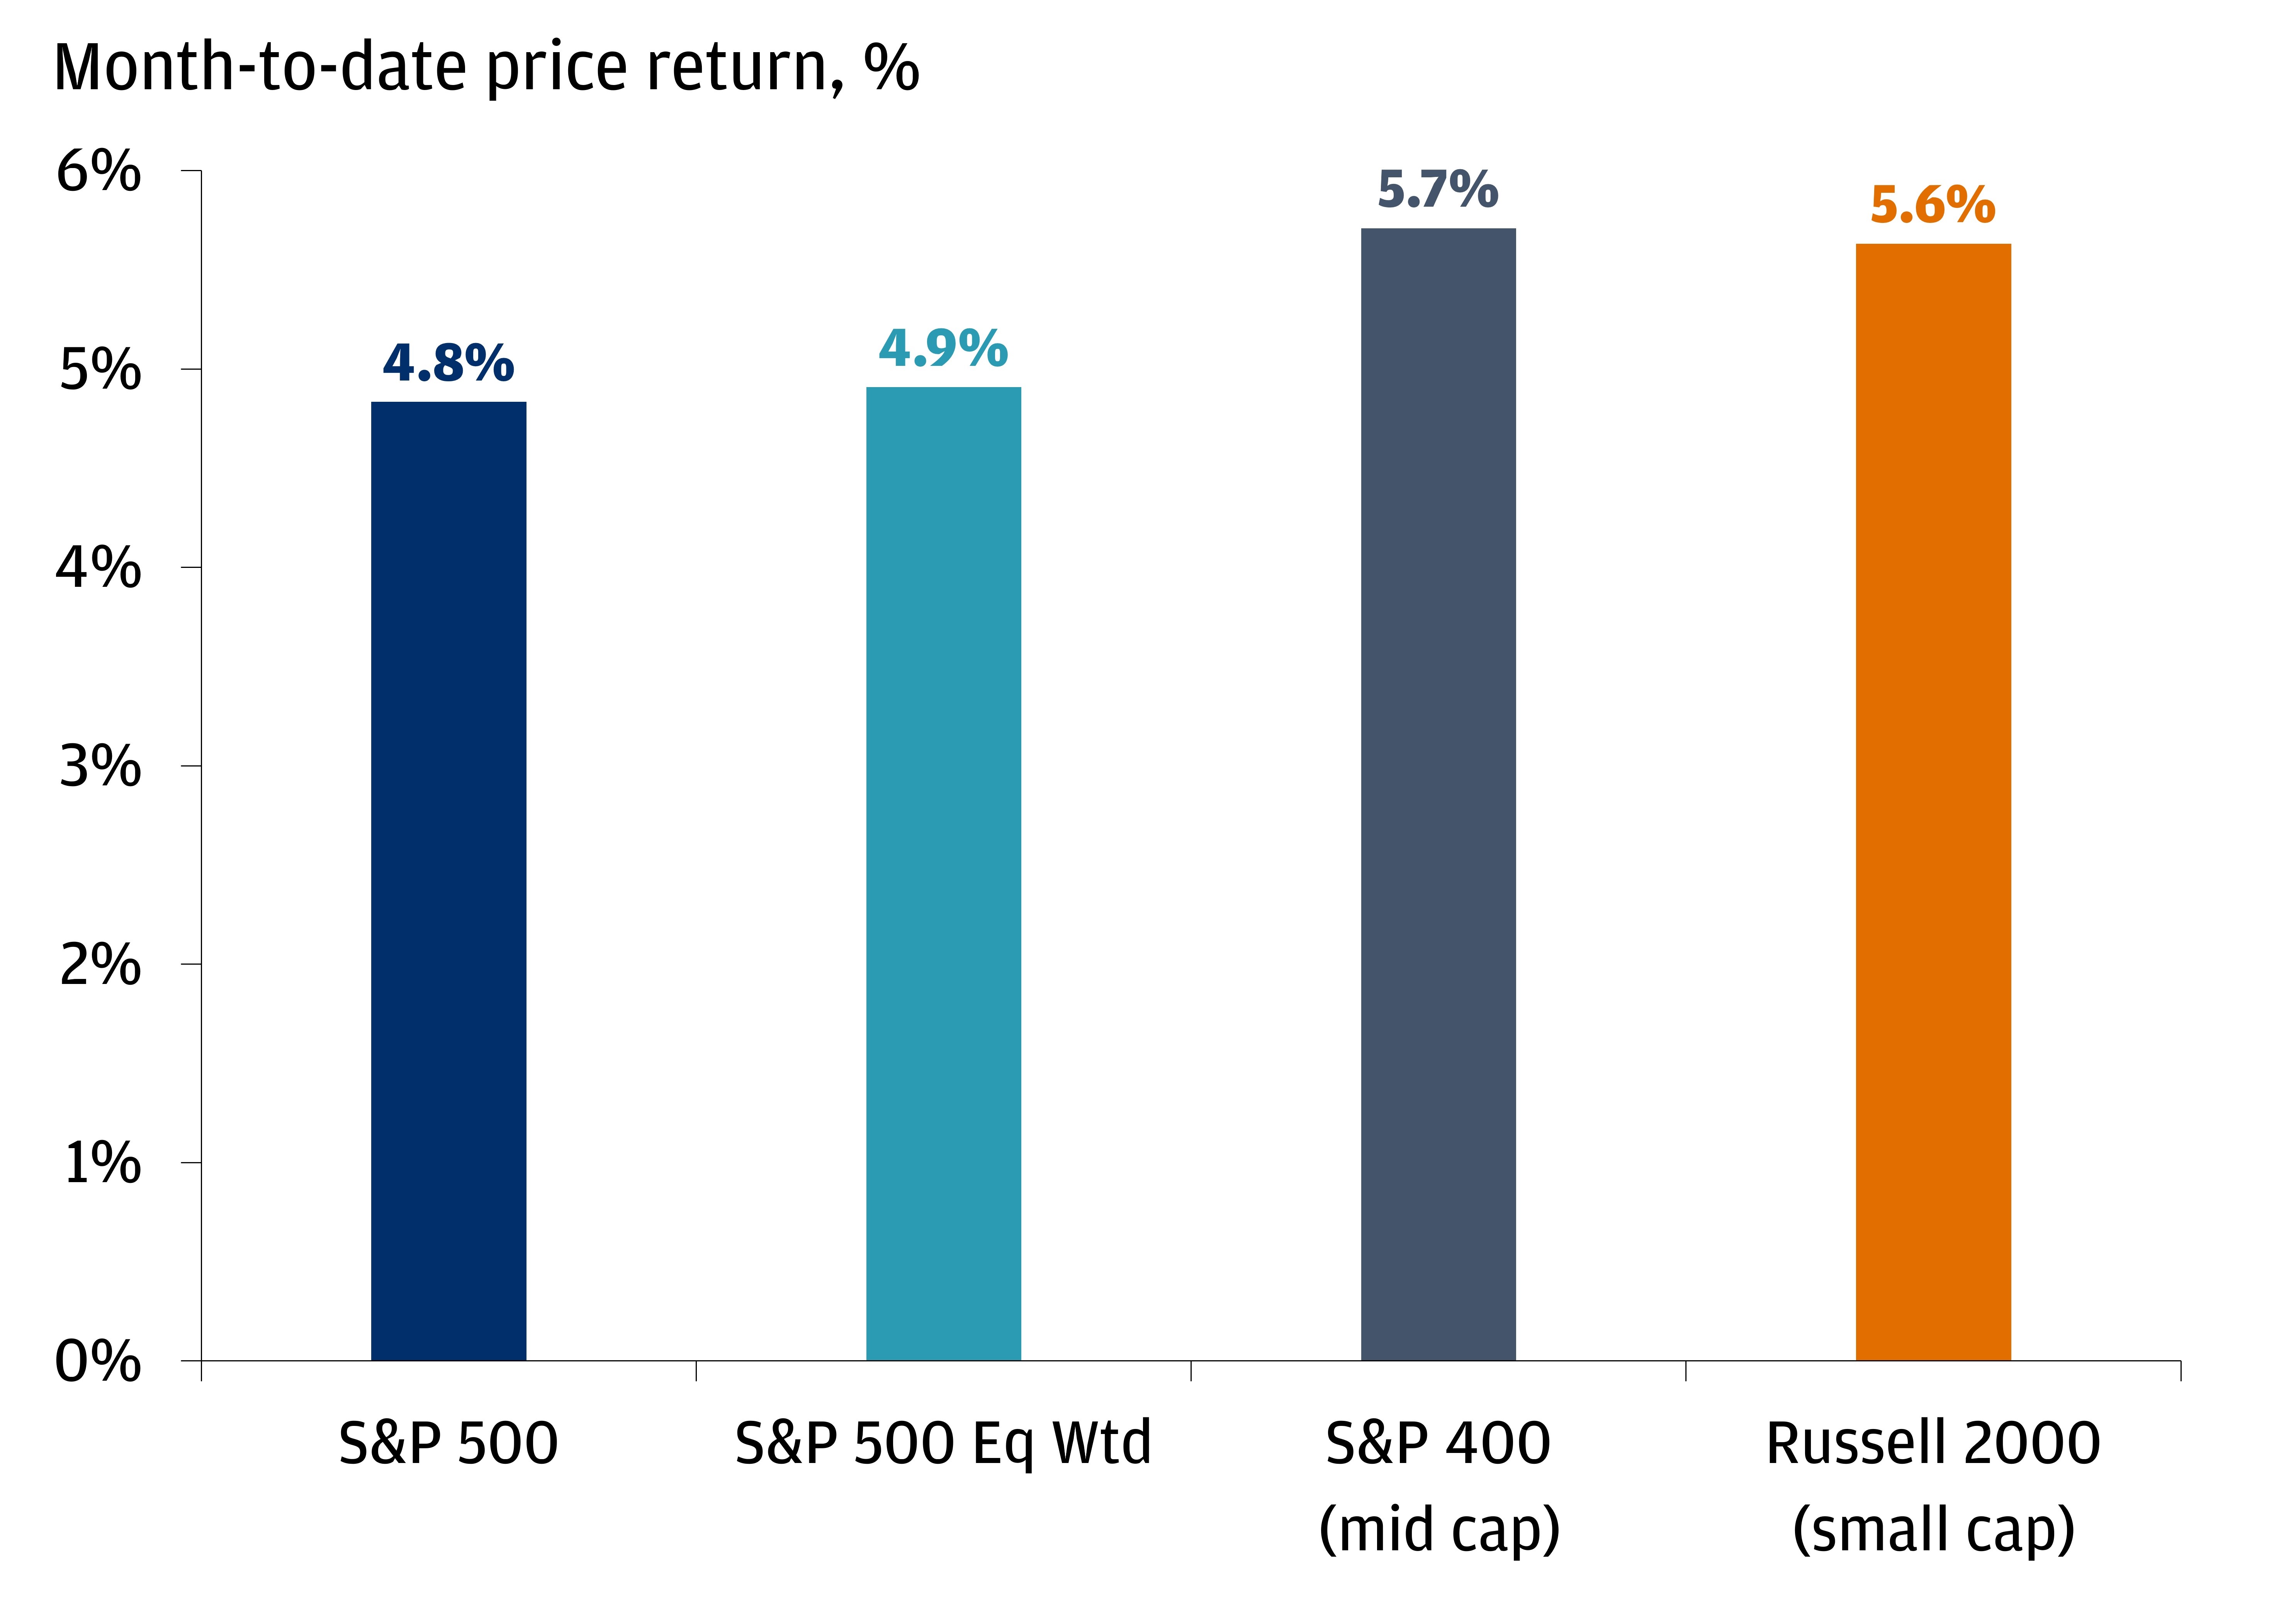 This bar chart shows the month-to-date performance of the S&P 500, equally weighted S&P 500, S&P 400 (mid-cap) and Russell 2000 (small-cap)